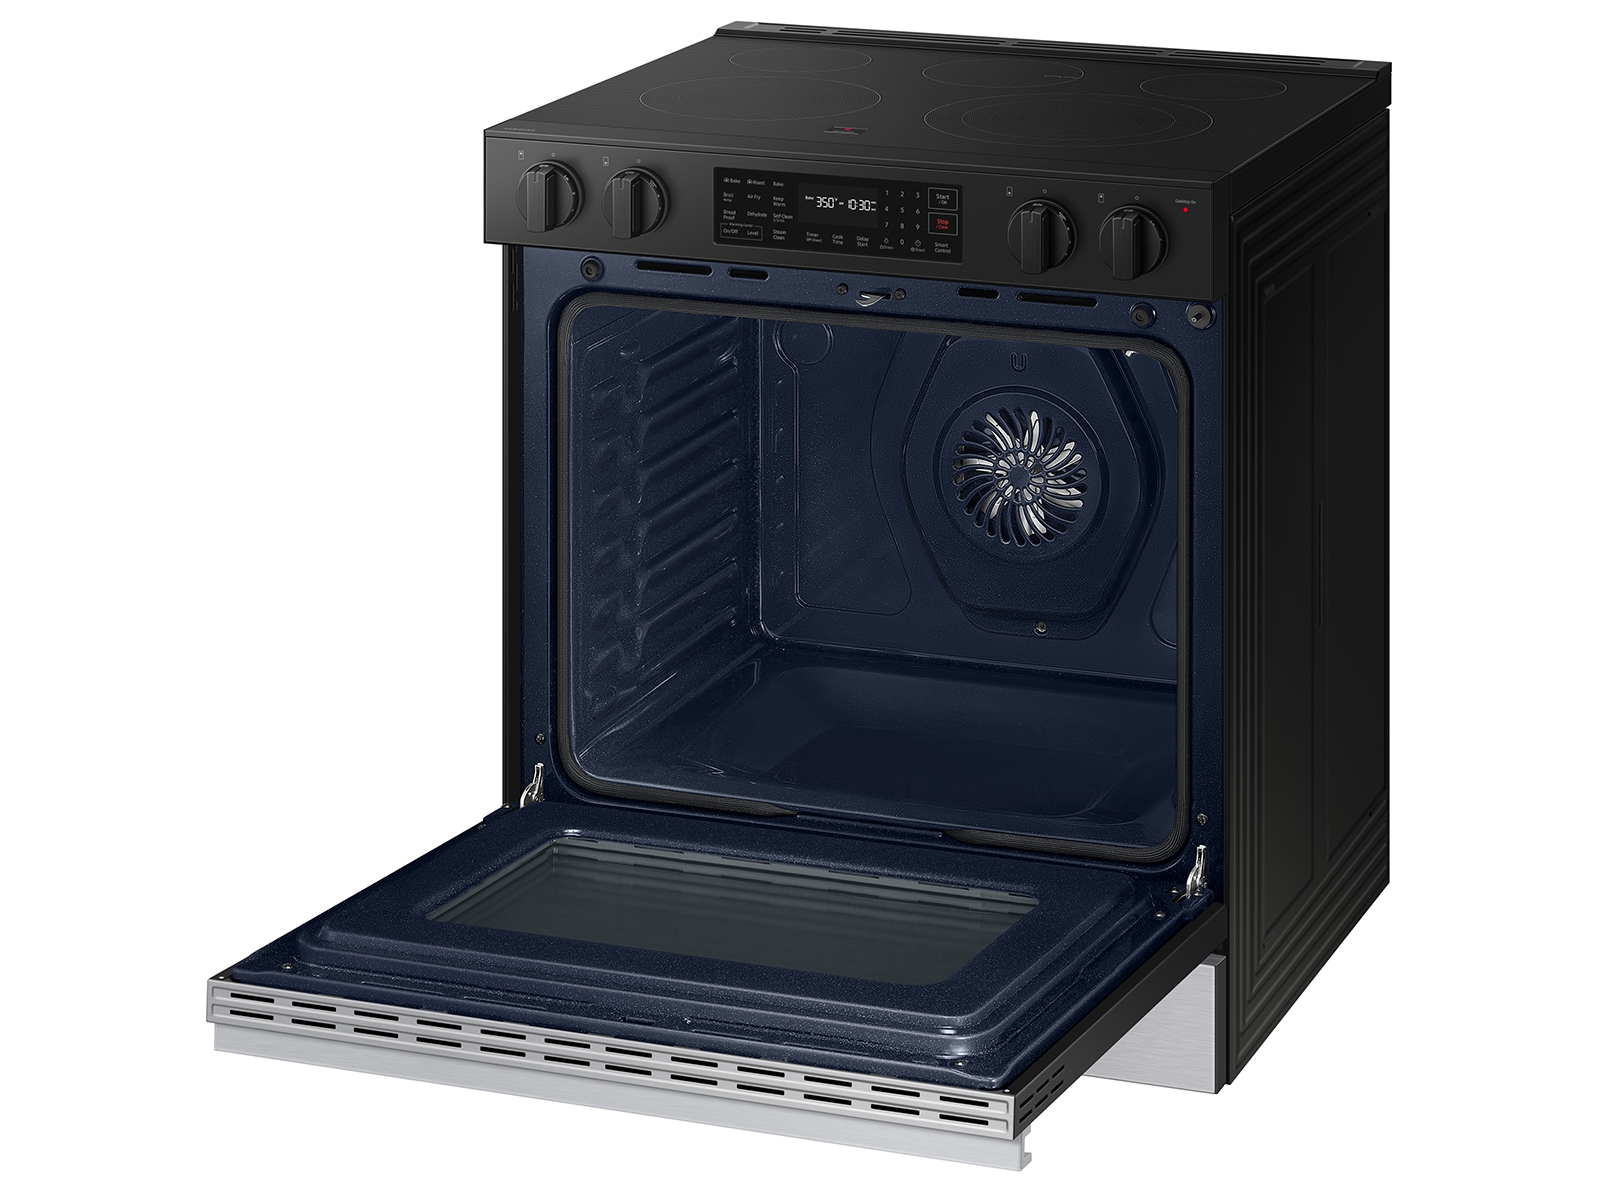 Thumbnail image of Oven Range with Open Door Showing Convection Fan